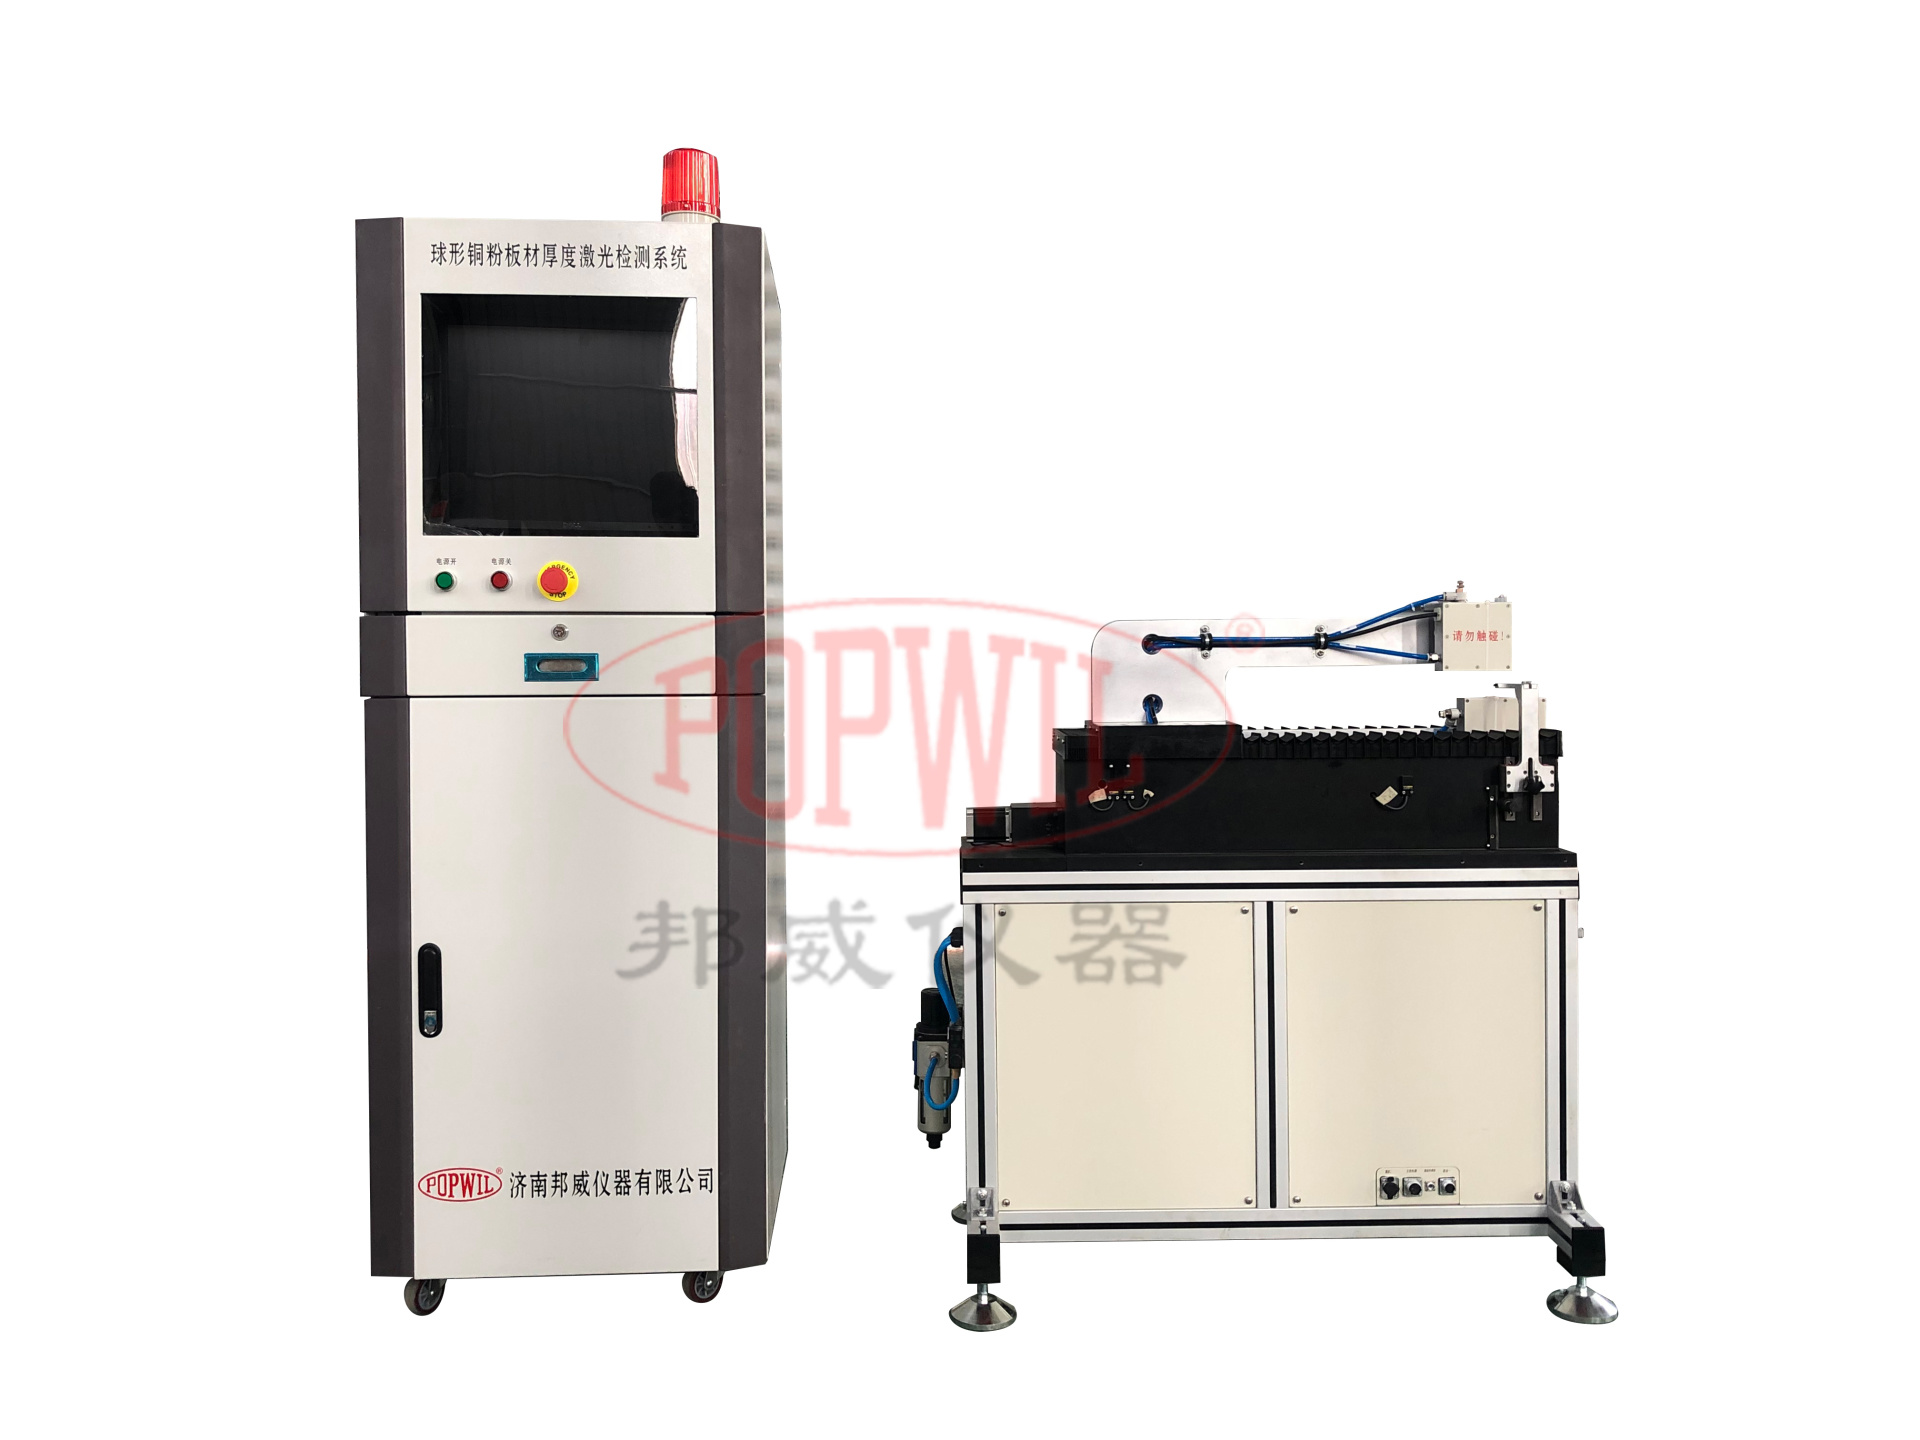 Production line thickness laser inspection system (high temperature and high speed)